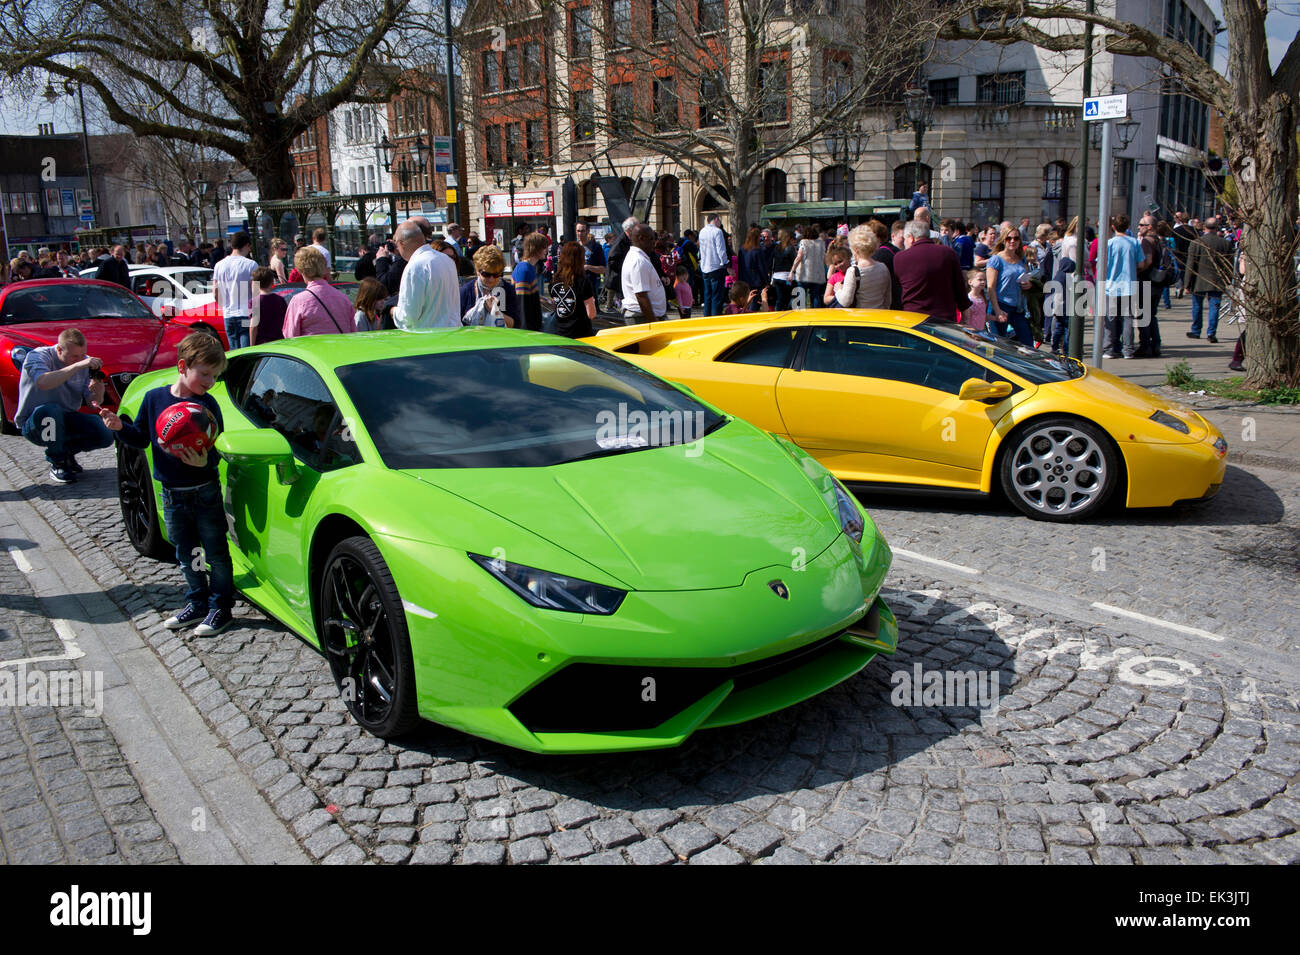 Horsham, UK. 06th Apr, 2015. Lamborghini cars displayed in the Carfax, Horsham during the Horsham Piazza Italia on Monday 6 April 2015. Piazza Italia 2015 was held in Horsham, West Sussex, from Friday 3 April to Monday 6 April 2015. Credit:  Christopher Mills/Alamy Live News Stock Photo